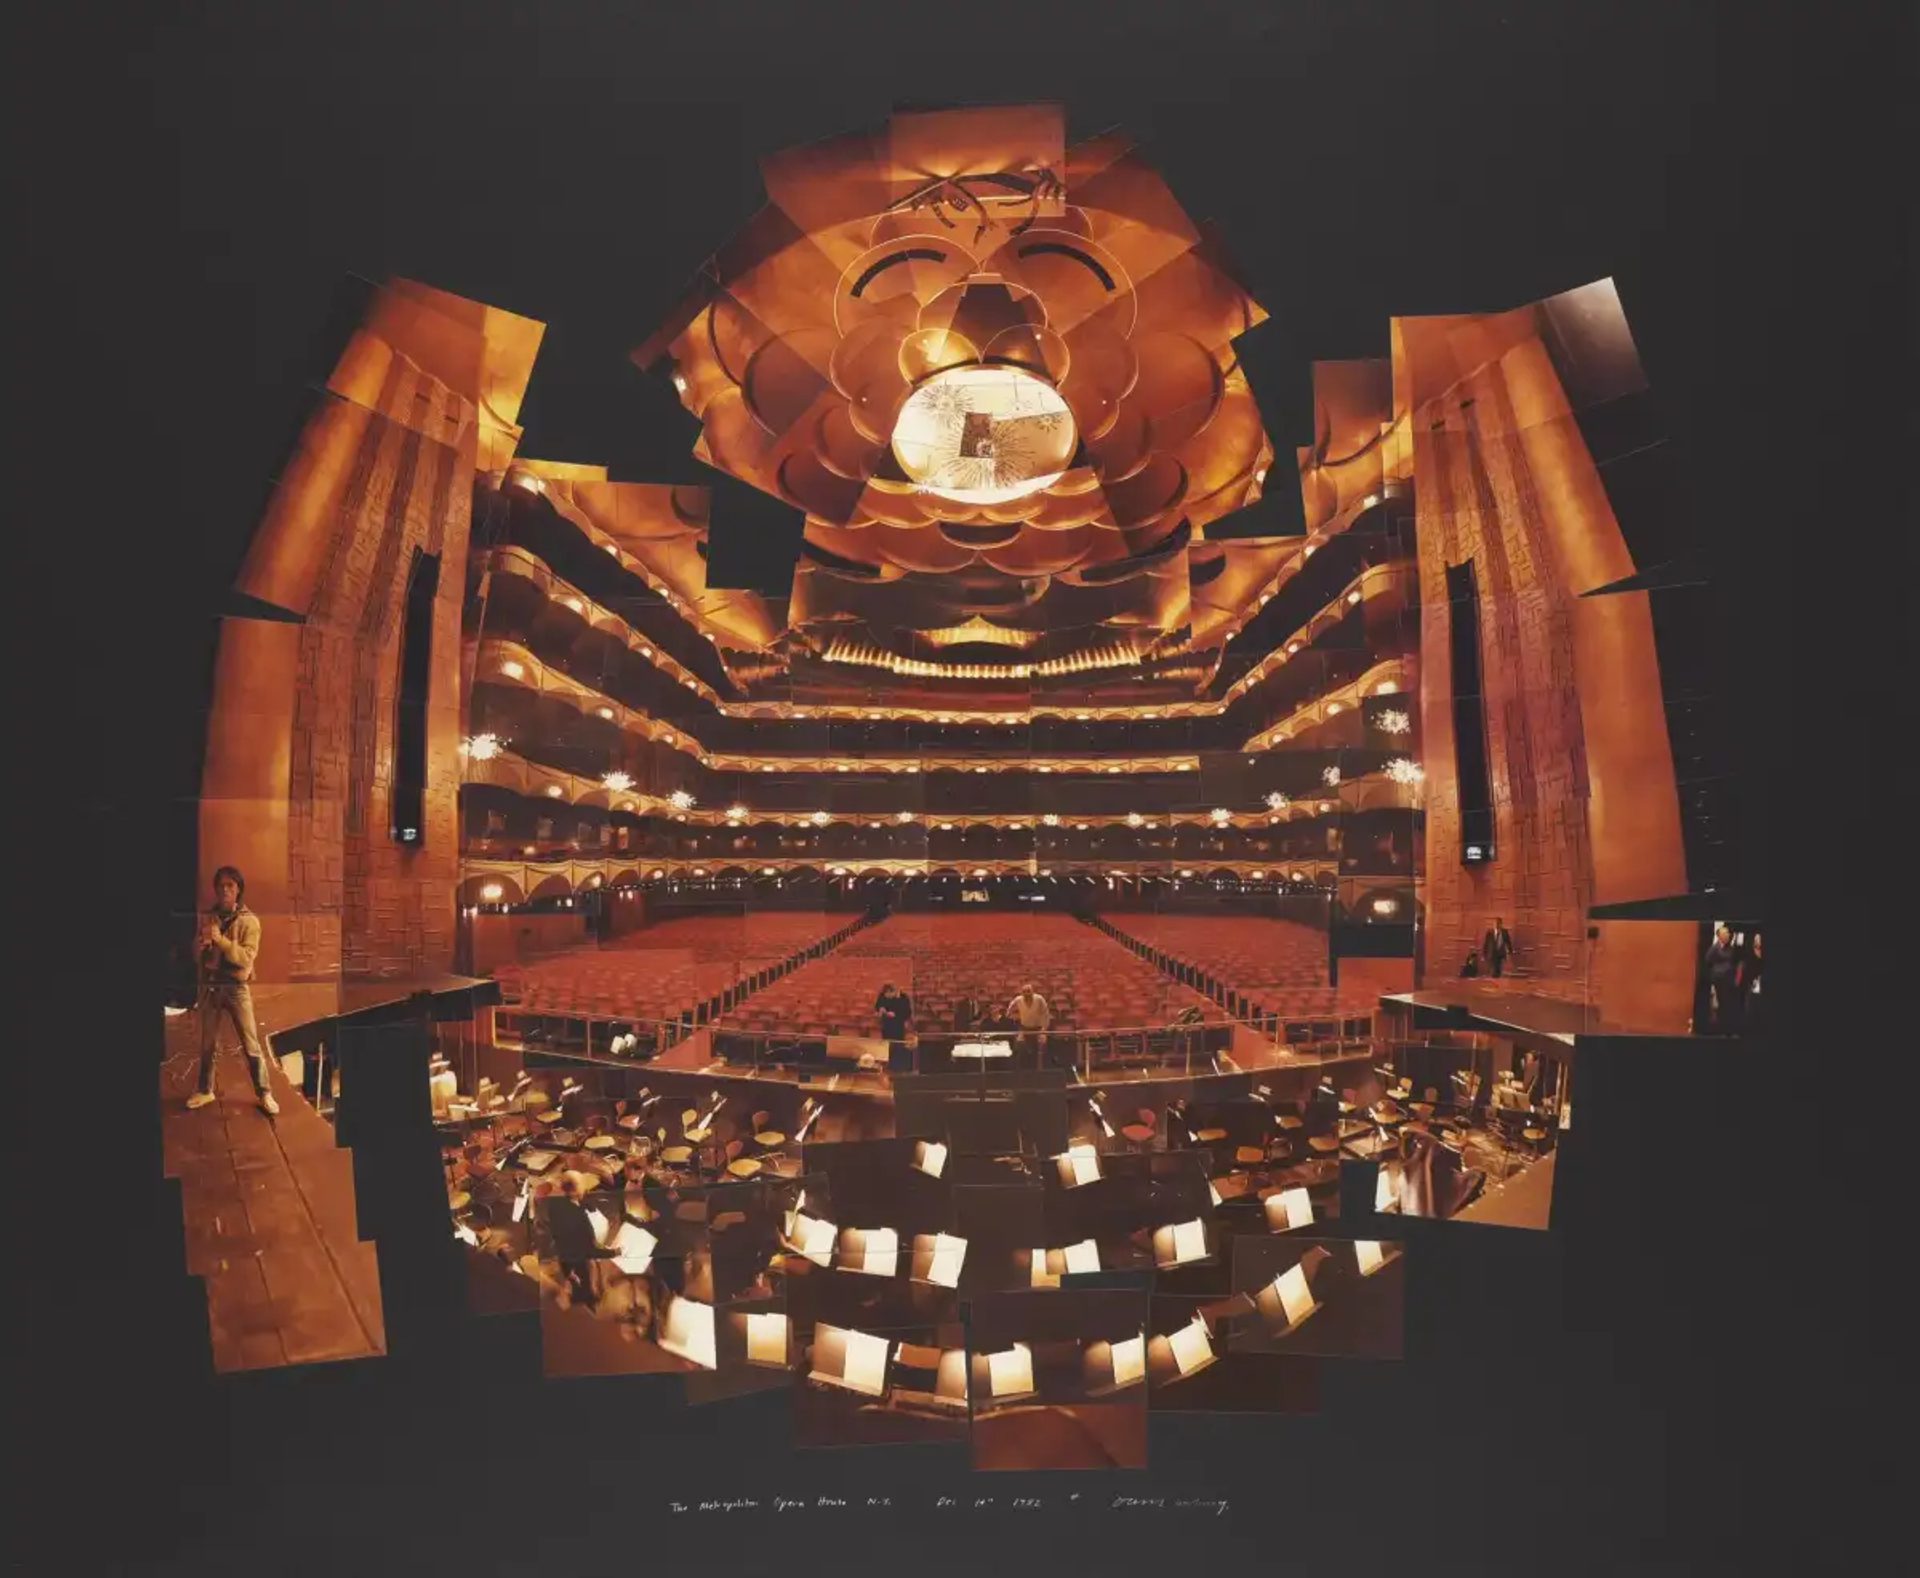 An image of a print by David Hockney, showing the interior of the Metropolitan Opera House as seen from the stage.